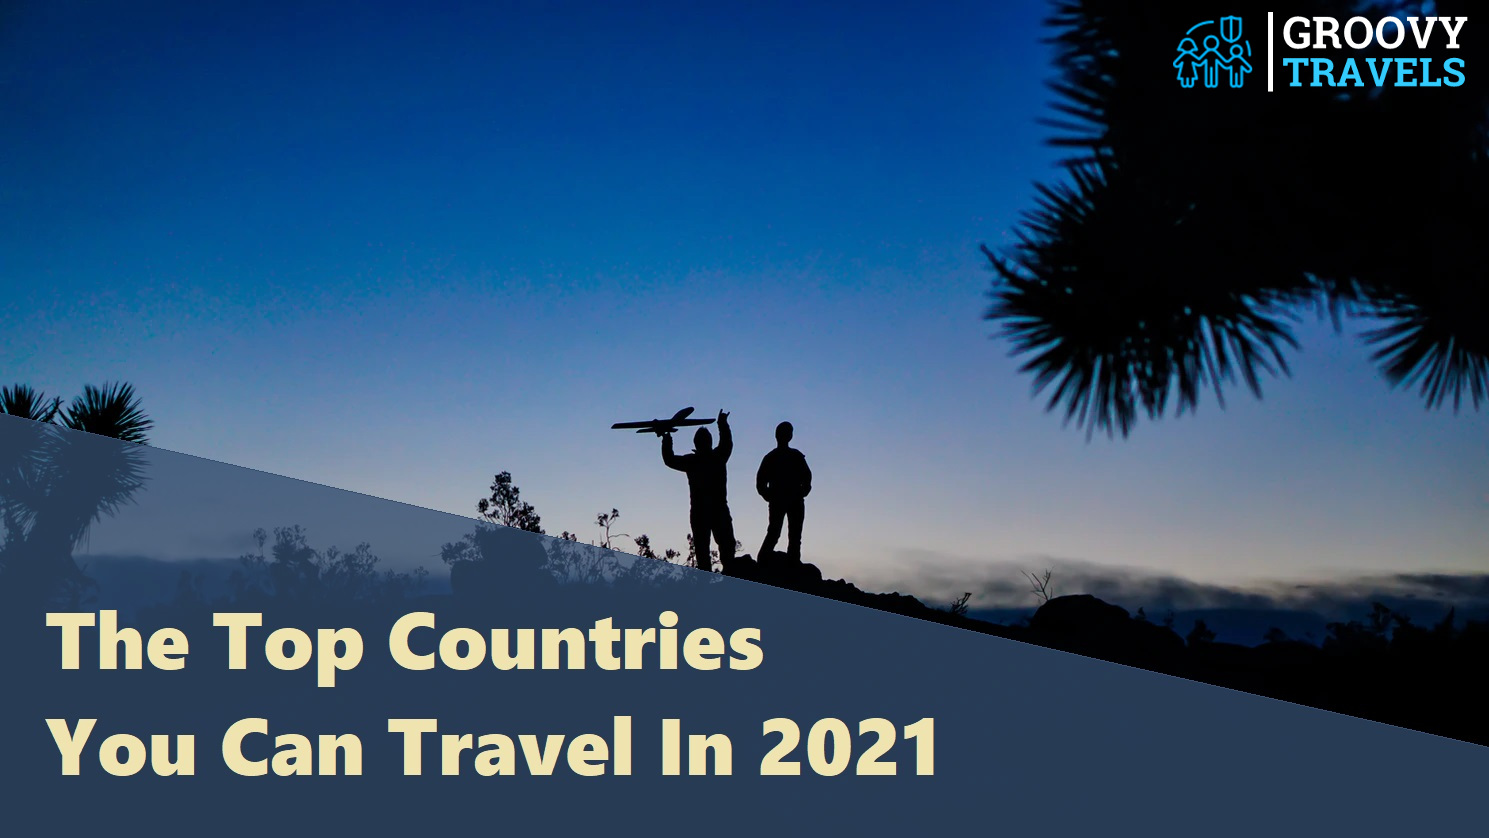 The Top Countries You Can Travel In 2021